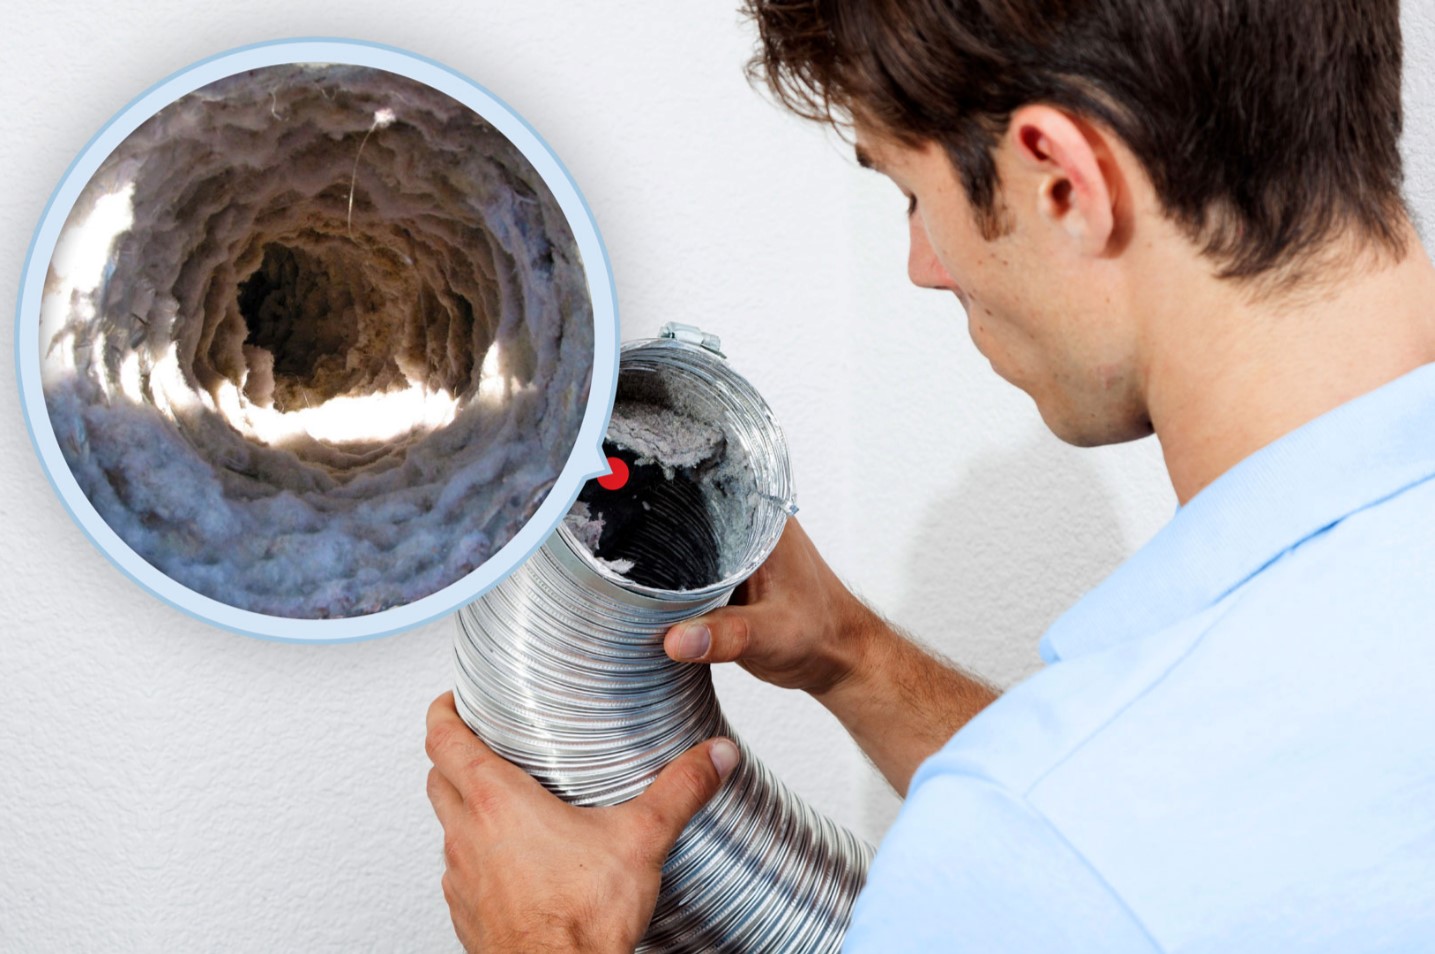 How To Clean A Dryer Vent In An Apartment